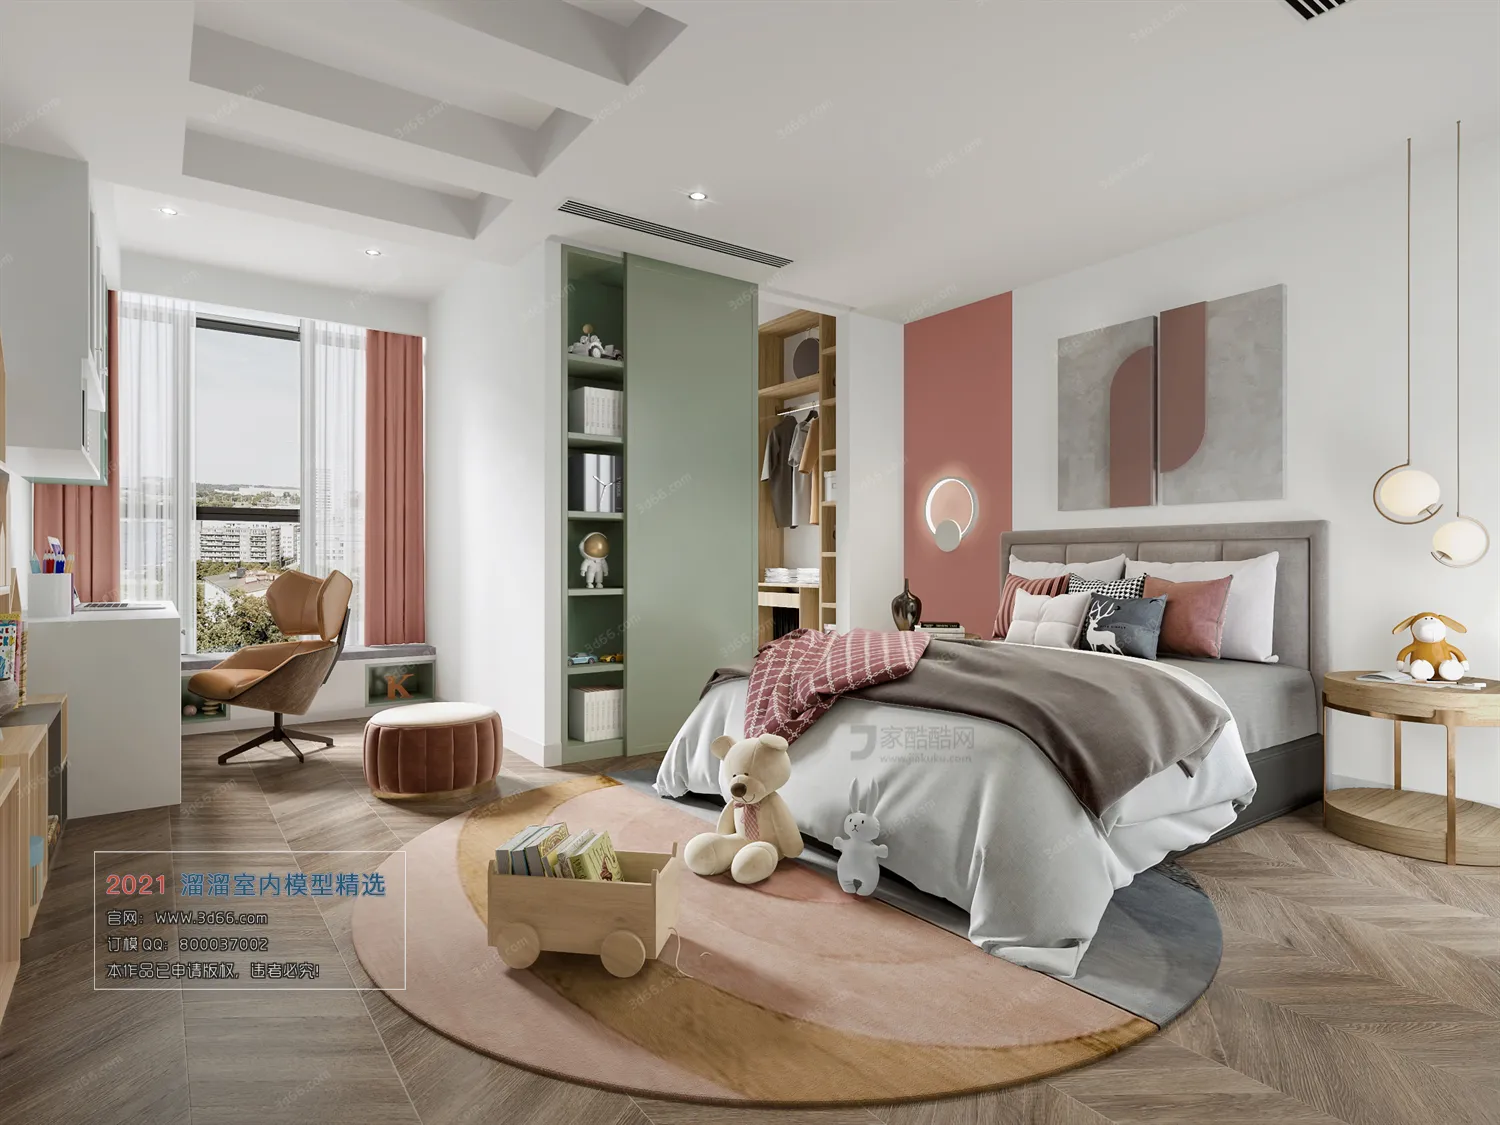 BEDROOM – A004-Modern style-Vray model